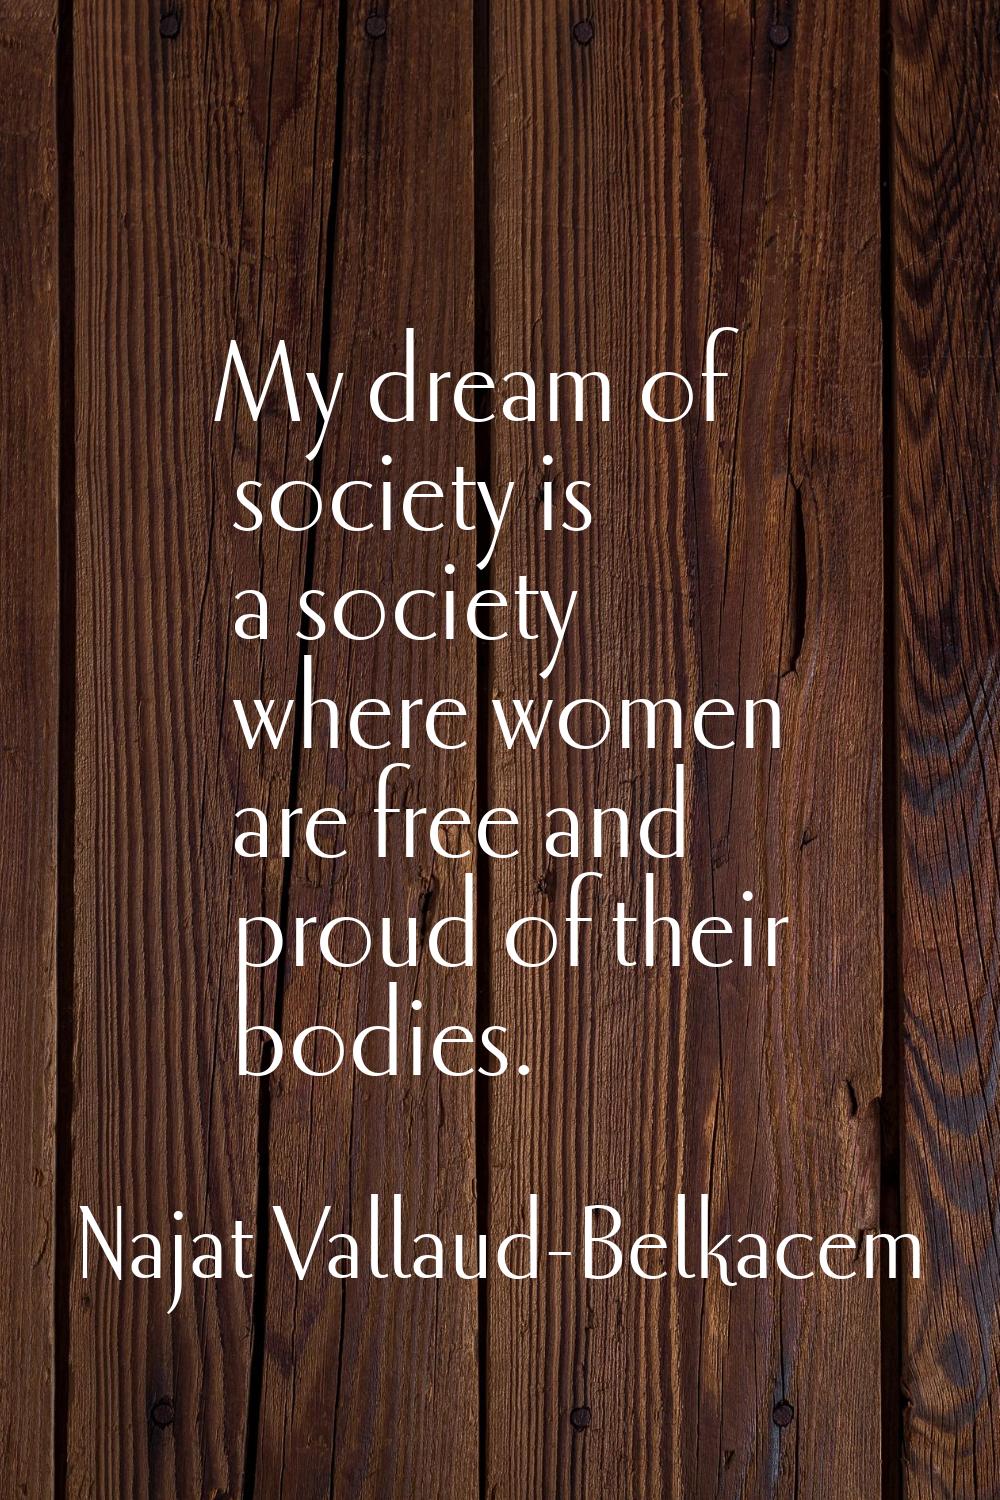 My dream of society is a society where women are free and proud of their bodies.